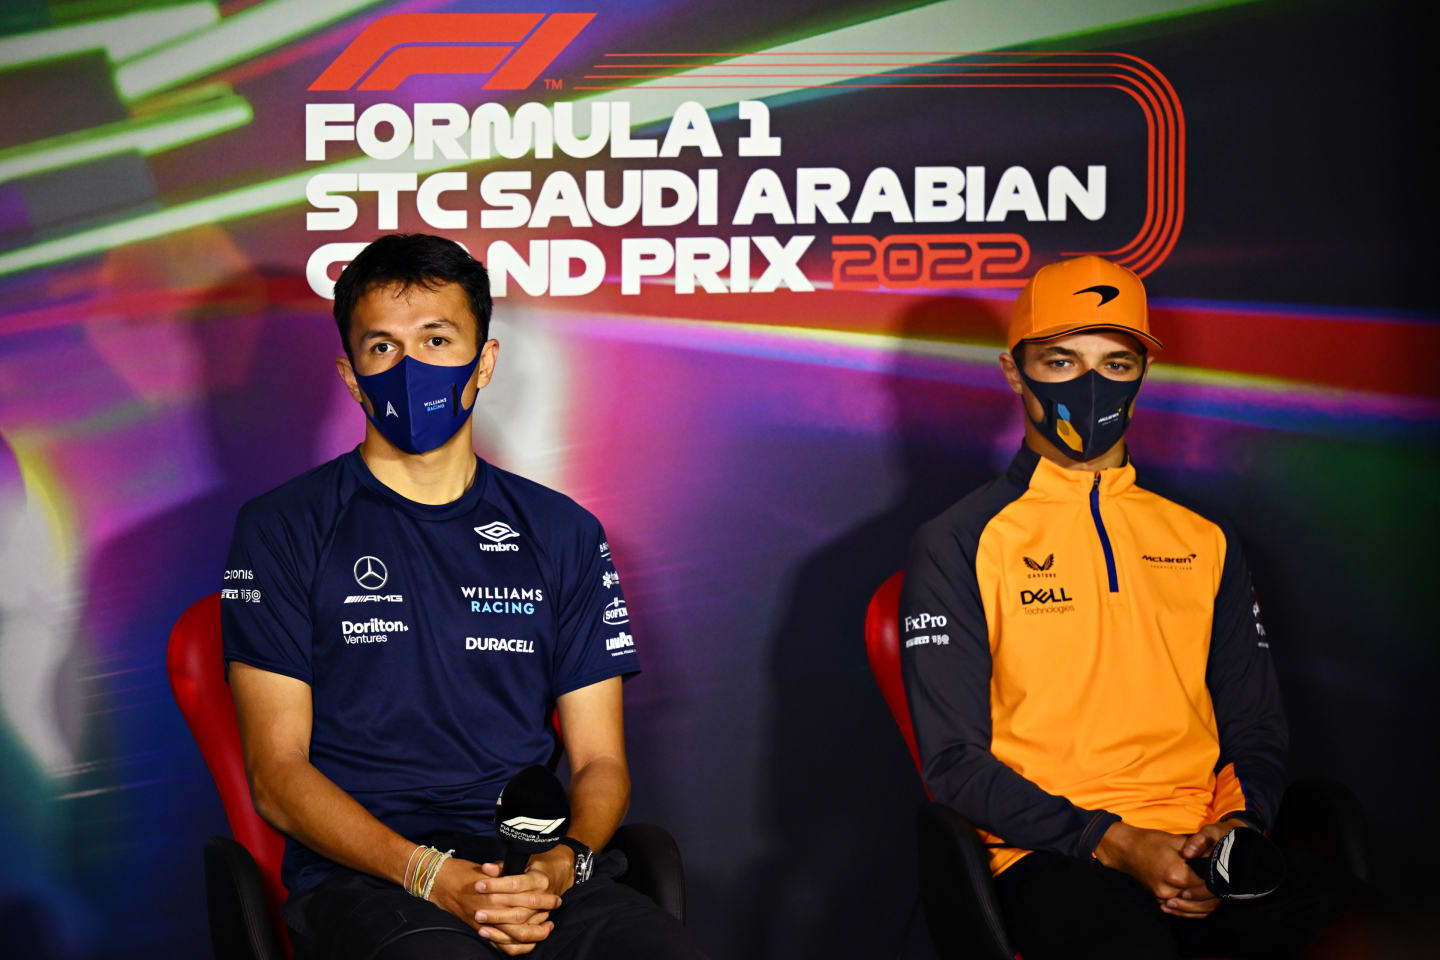 JEDDAH, SAUDI ARABIA - MARCH 25: Alexander Albon of Thailand and Williams and Lando Norris of Great Britain and McLaren attend the Drivers Press Conference before practice ahead of the F1 Grand Prix of Saudi Arabia at the Jeddah Corniche Circuit on March 25, 2022 in Jeddah, Saudi Arabia. (Photo by Clive Mason/Getty Images)